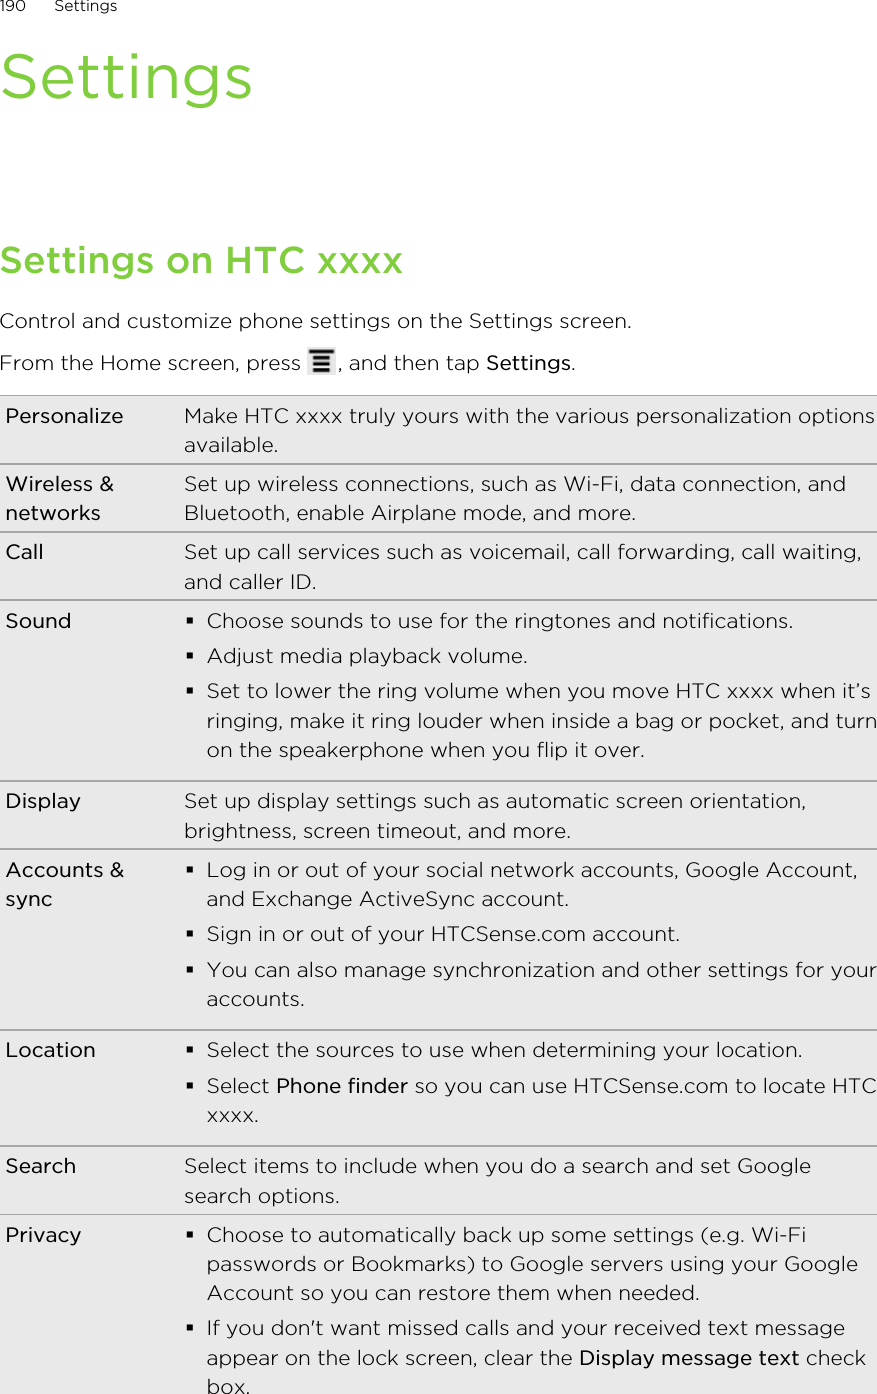 SettingsSettings on HTC xxxxControl and customize phone settings on the Settings screen.From the Home screen, press  , and then tap Settings.Personalize Make HTC xxxx truly yours with the various personalization optionsavailable.Wireless &amp;networksSet up wireless connections, such as Wi-Fi, data connection, andBluetooth, enable Airplane mode, and more.Call Set up call services such as voicemail, call forwarding, call waiting,and caller ID.Sound §Choose sounds to use for the ringtones and notifications.§Adjust media playback volume.§Set to lower the ring volume when you move HTC xxxx when it’sringing, make it ring louder when inside a bag or pocket, and turnon the speakerphone when you flip it over.Display Set up display settings such as automatic screen orientation,brightness, screen timeout, and more.Accounts &amp;sync§Log in or out of your social network accounts, Google Account,and Exchange ActiveSync account.§Sign in or out of your HTCSense.com account.§You can also manage synchronization and other settings for youraccounts.Location §Select the sources to use when determining your location.§Select Phone finder so you can use HTCSense.com to locate HTCxxxx.Search Select items to include when you do a search and set Googlesearch options.Privacy §Choose to automatically back up some settings (e.g. Wi-Fipasswords or Bookmarks) to Google servers using your GoogleAccount so you can restore them when needed.§If you don&apos;t want missed calls and your received text messageappear on the lock screen, clear the Display message text checkbox.190 Settings